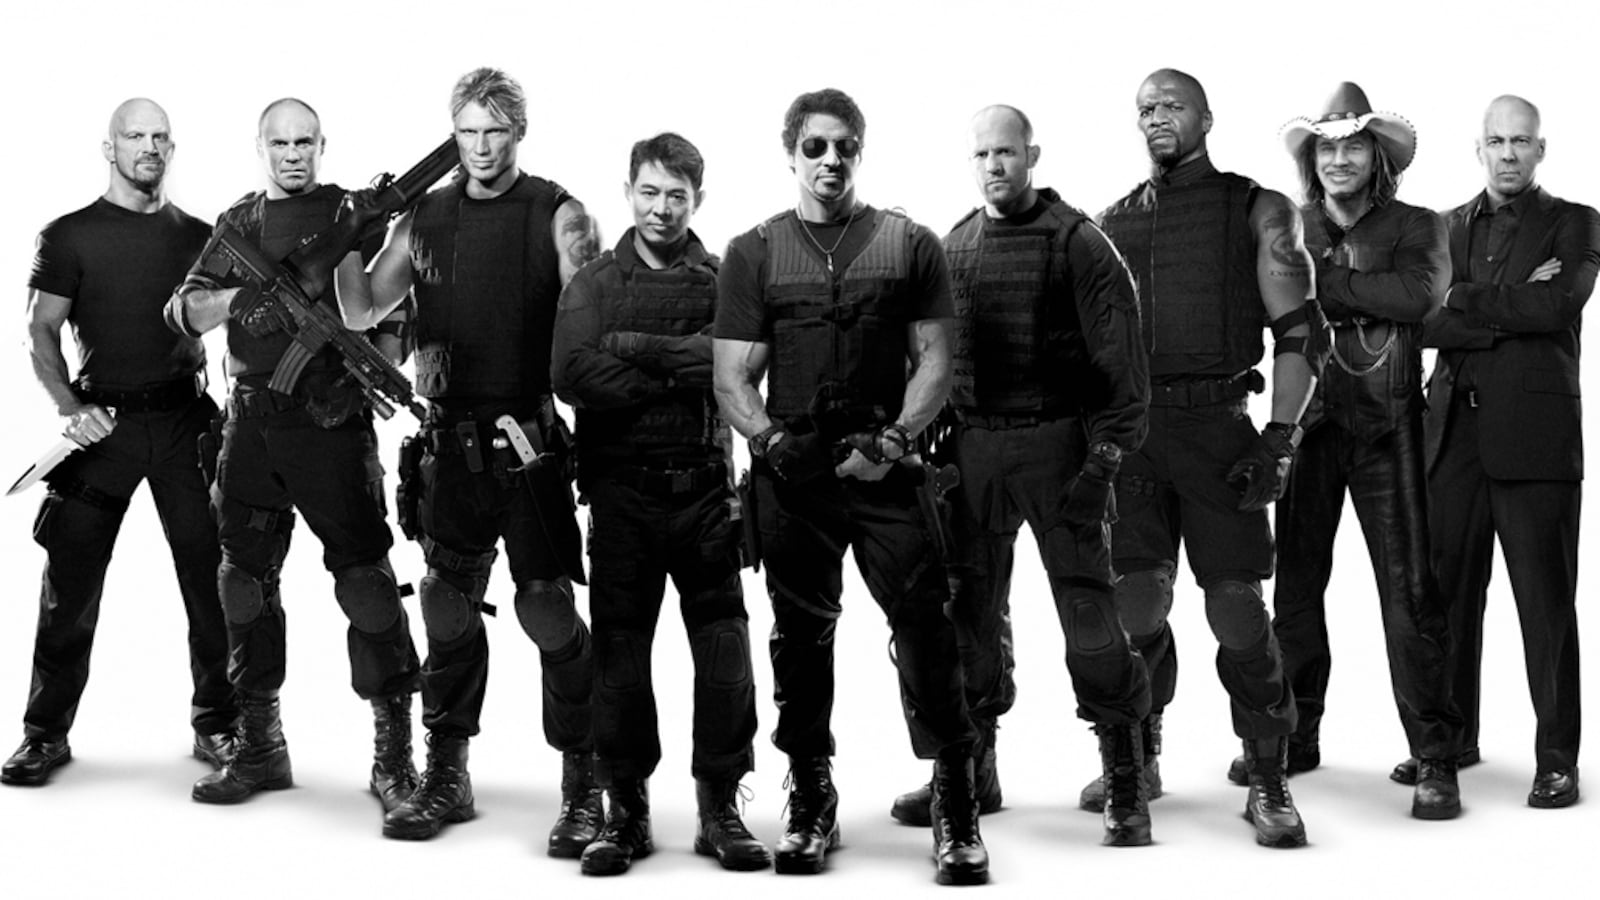 the-expendables-2010